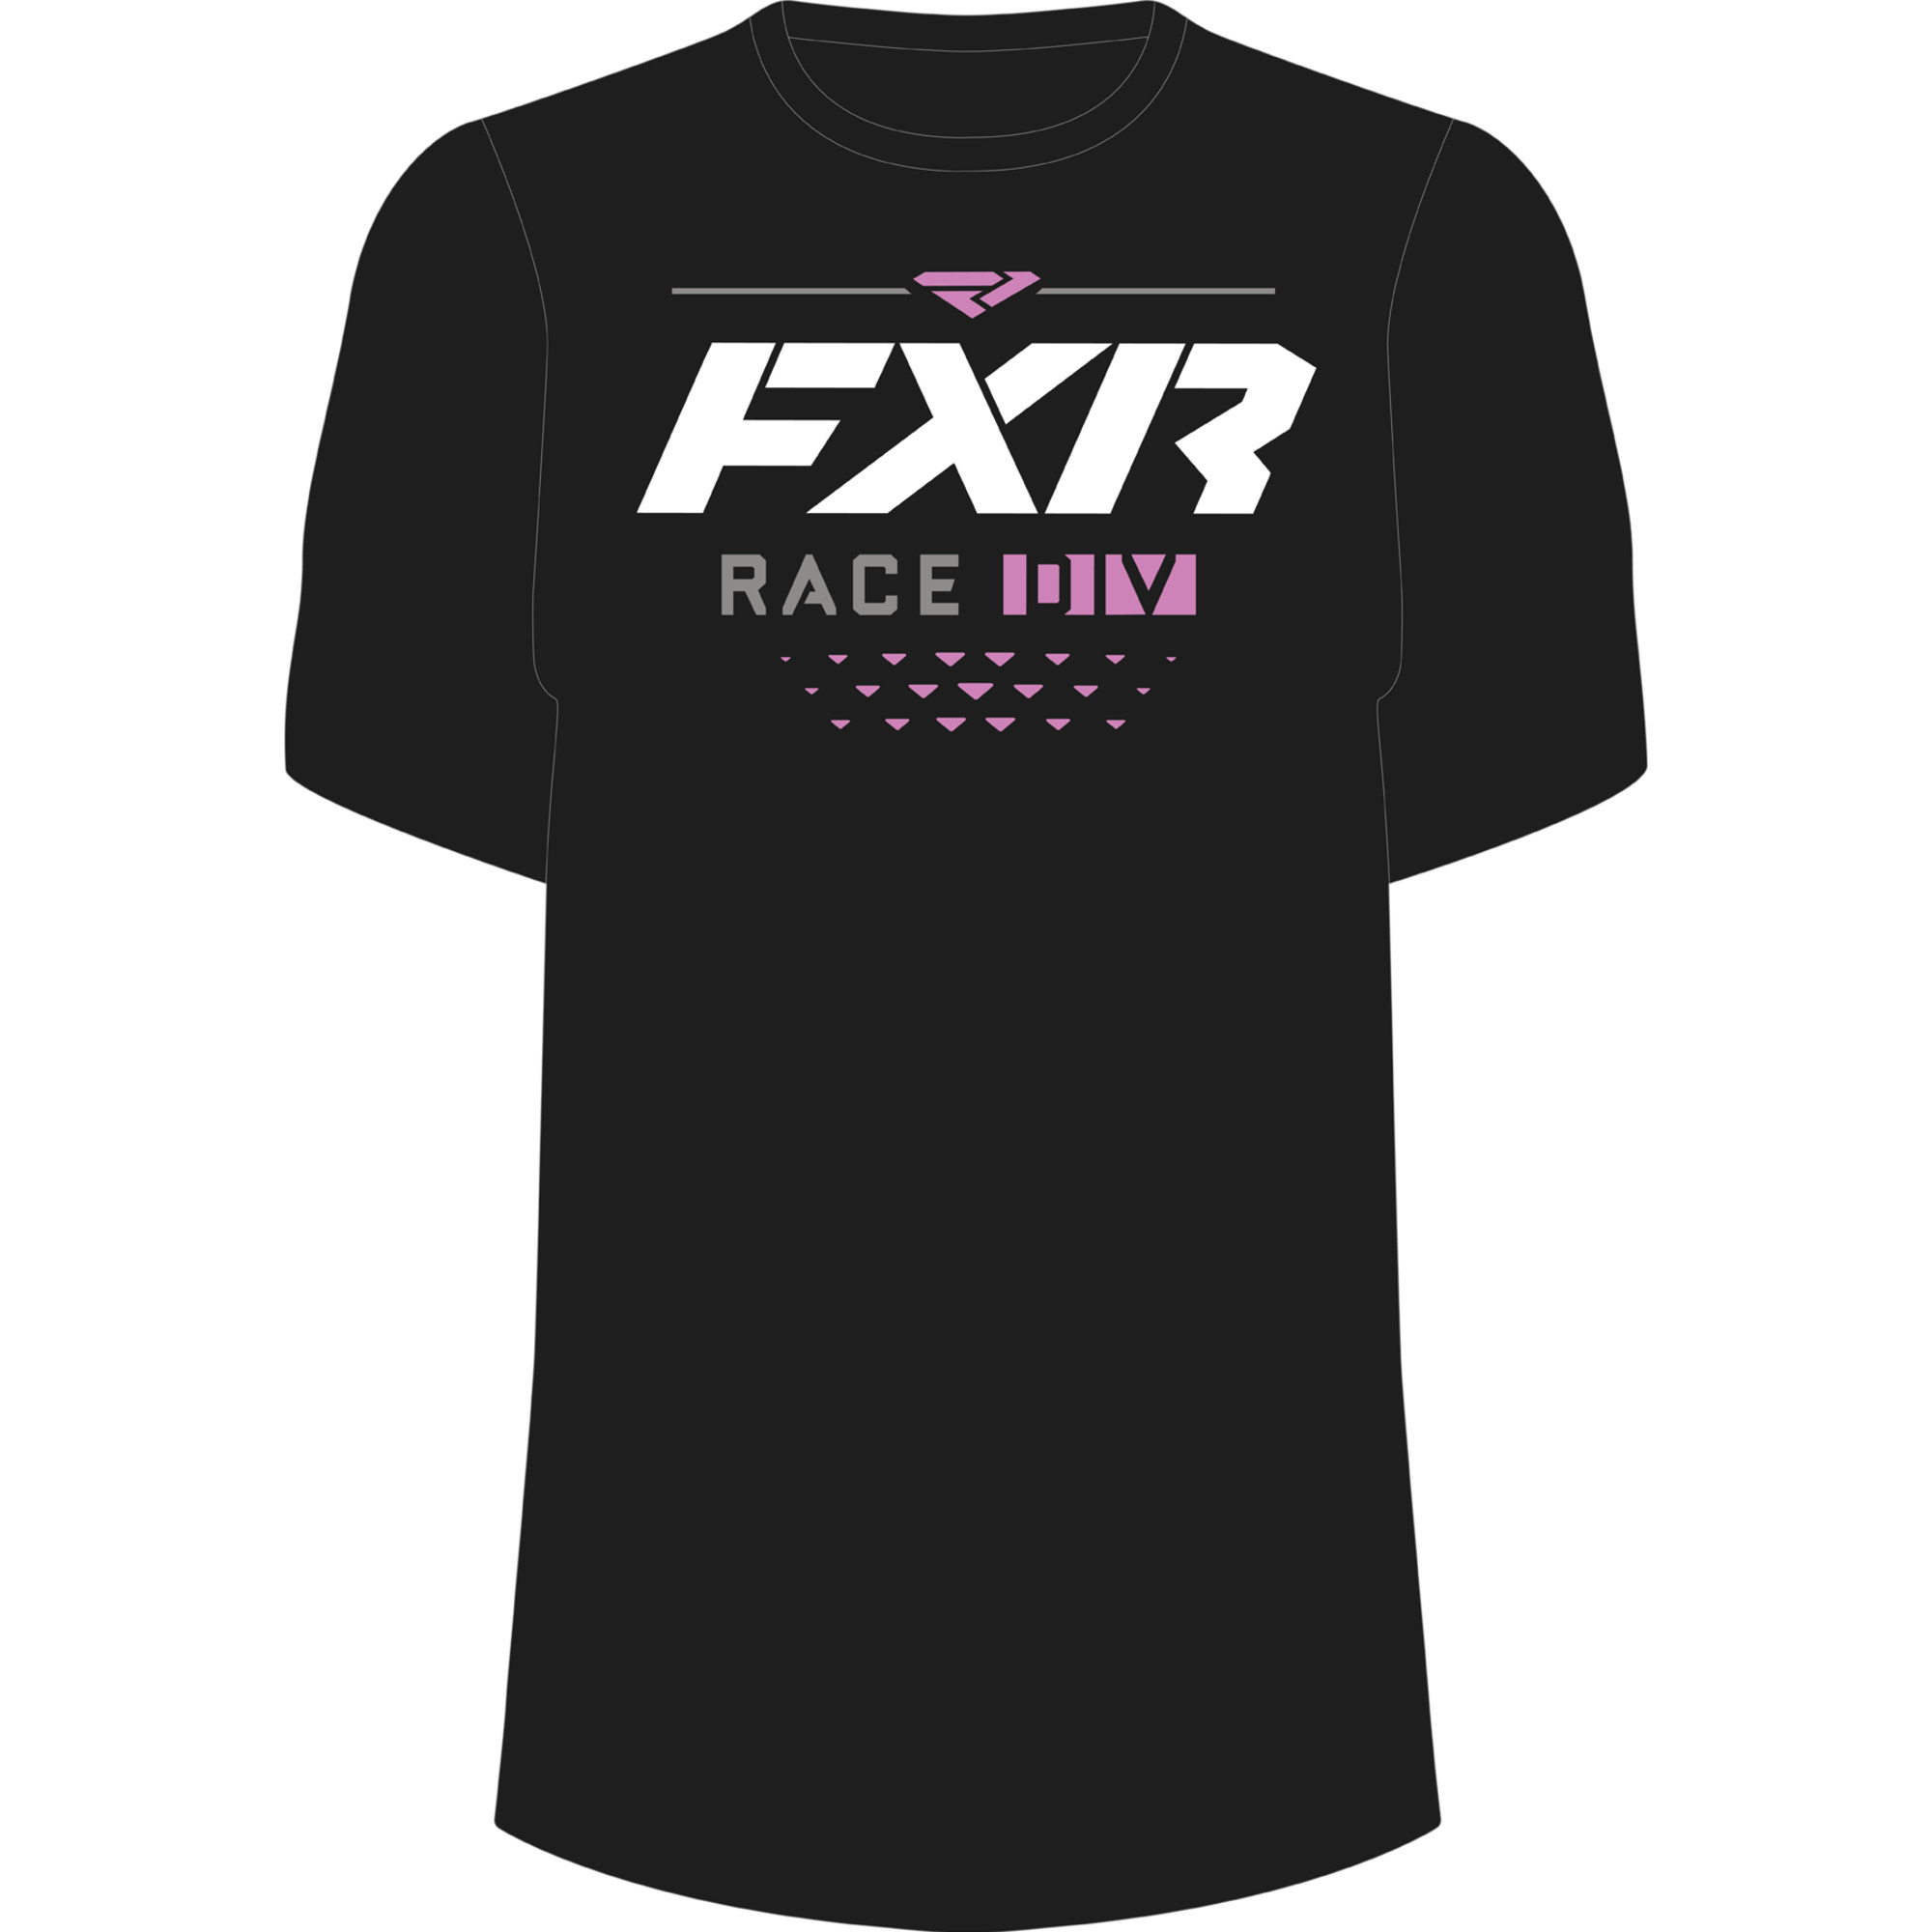 fxr racing t-shirt shirts for kids toddlers race division